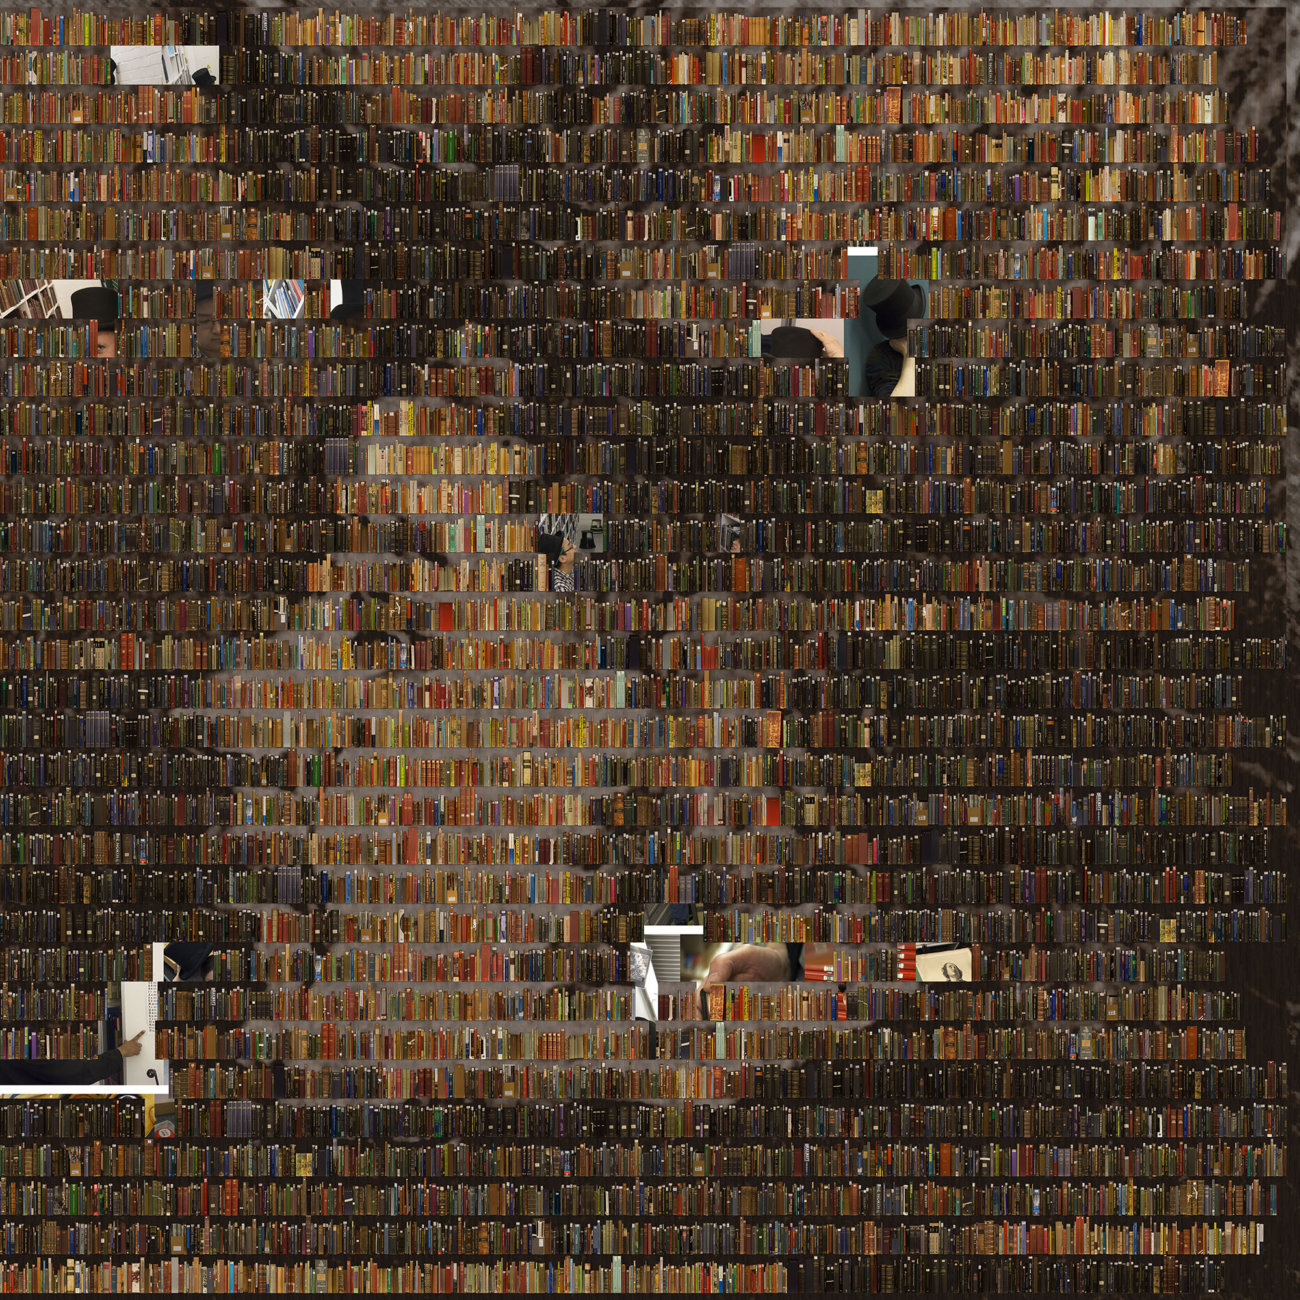 collage of 50 thousand mostly brown book spines revealing a face